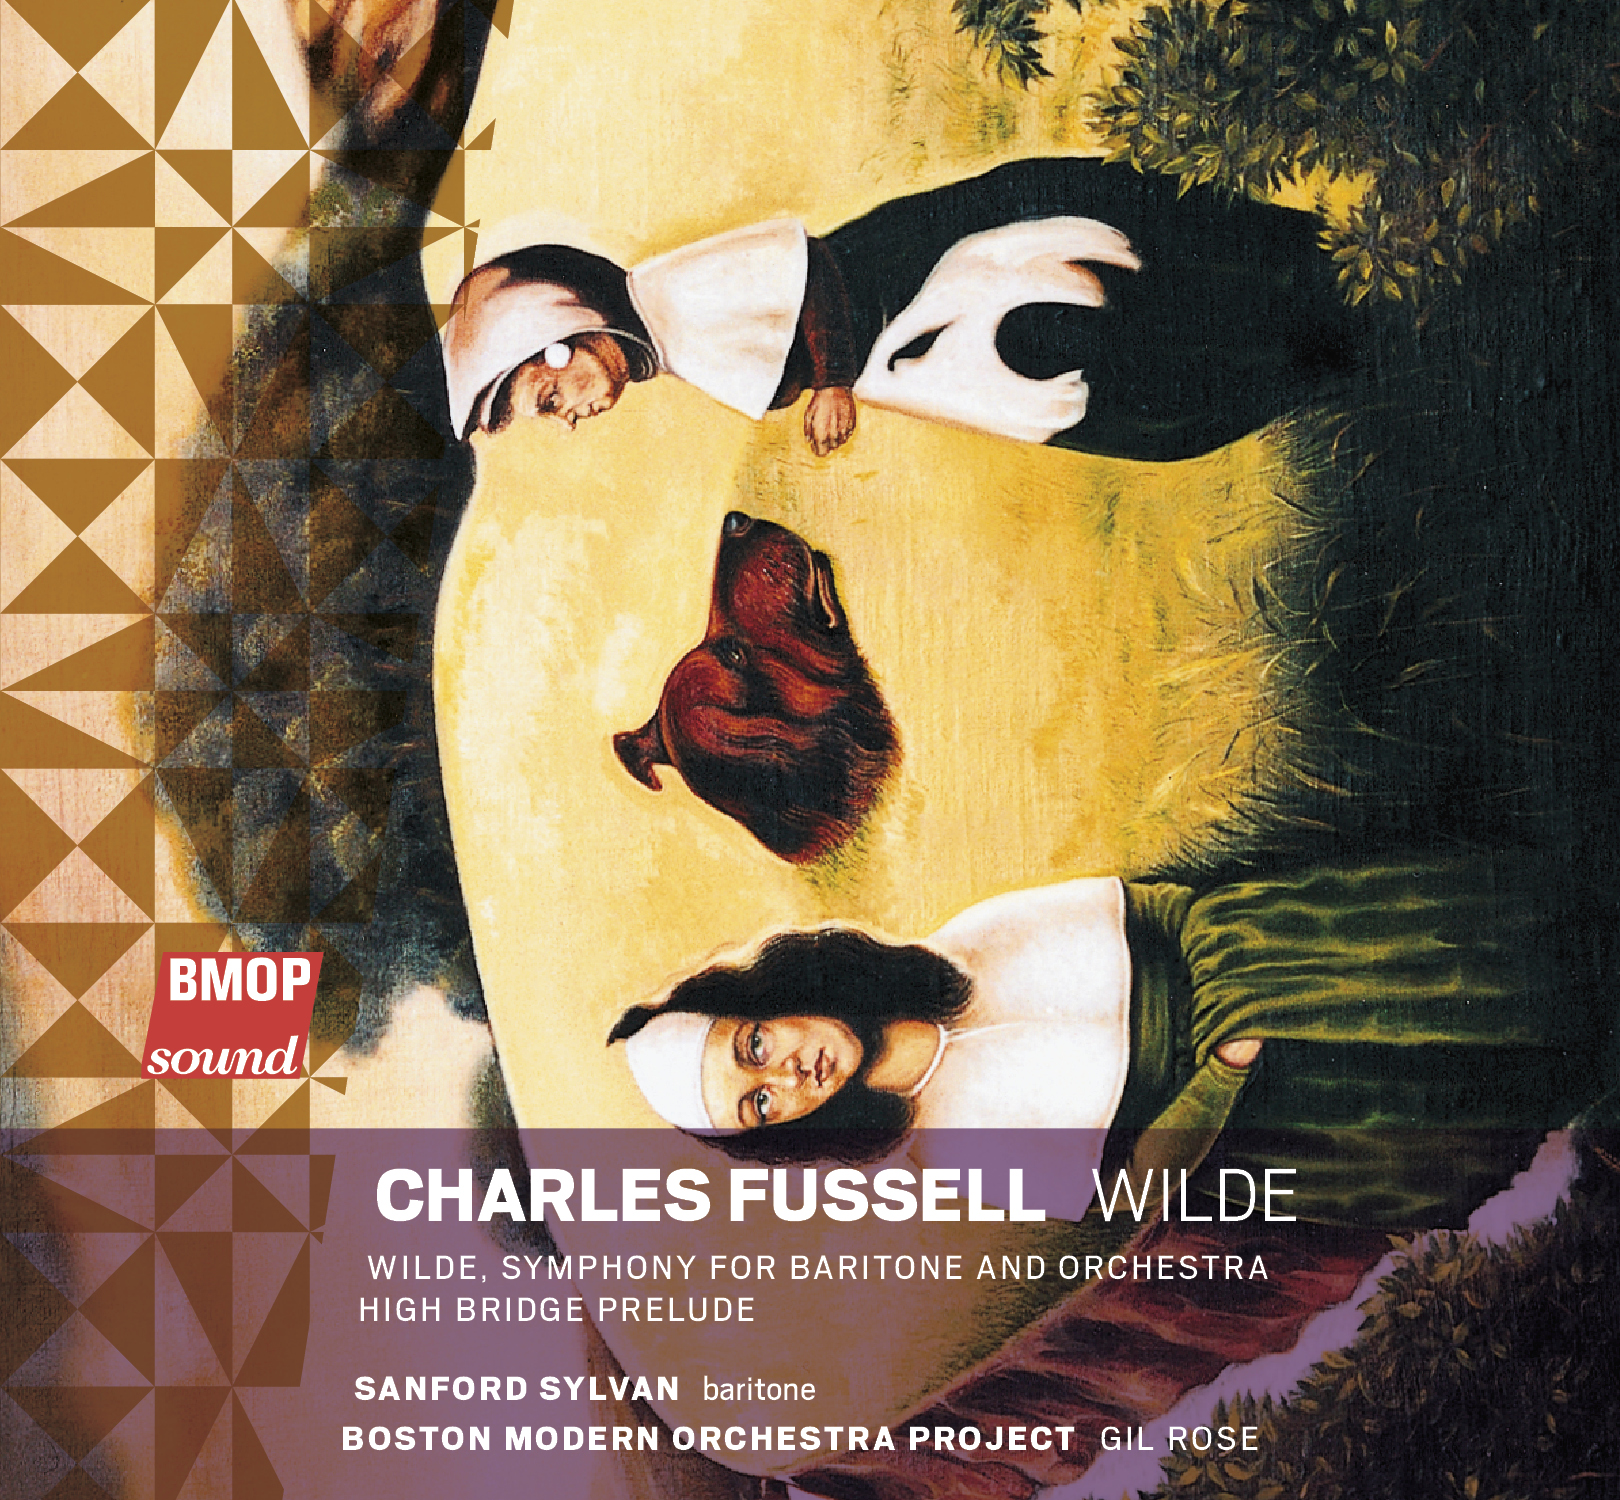 Art for Wilde - Part I - London by Charles Fussell by Sanford Sylvan, baritone